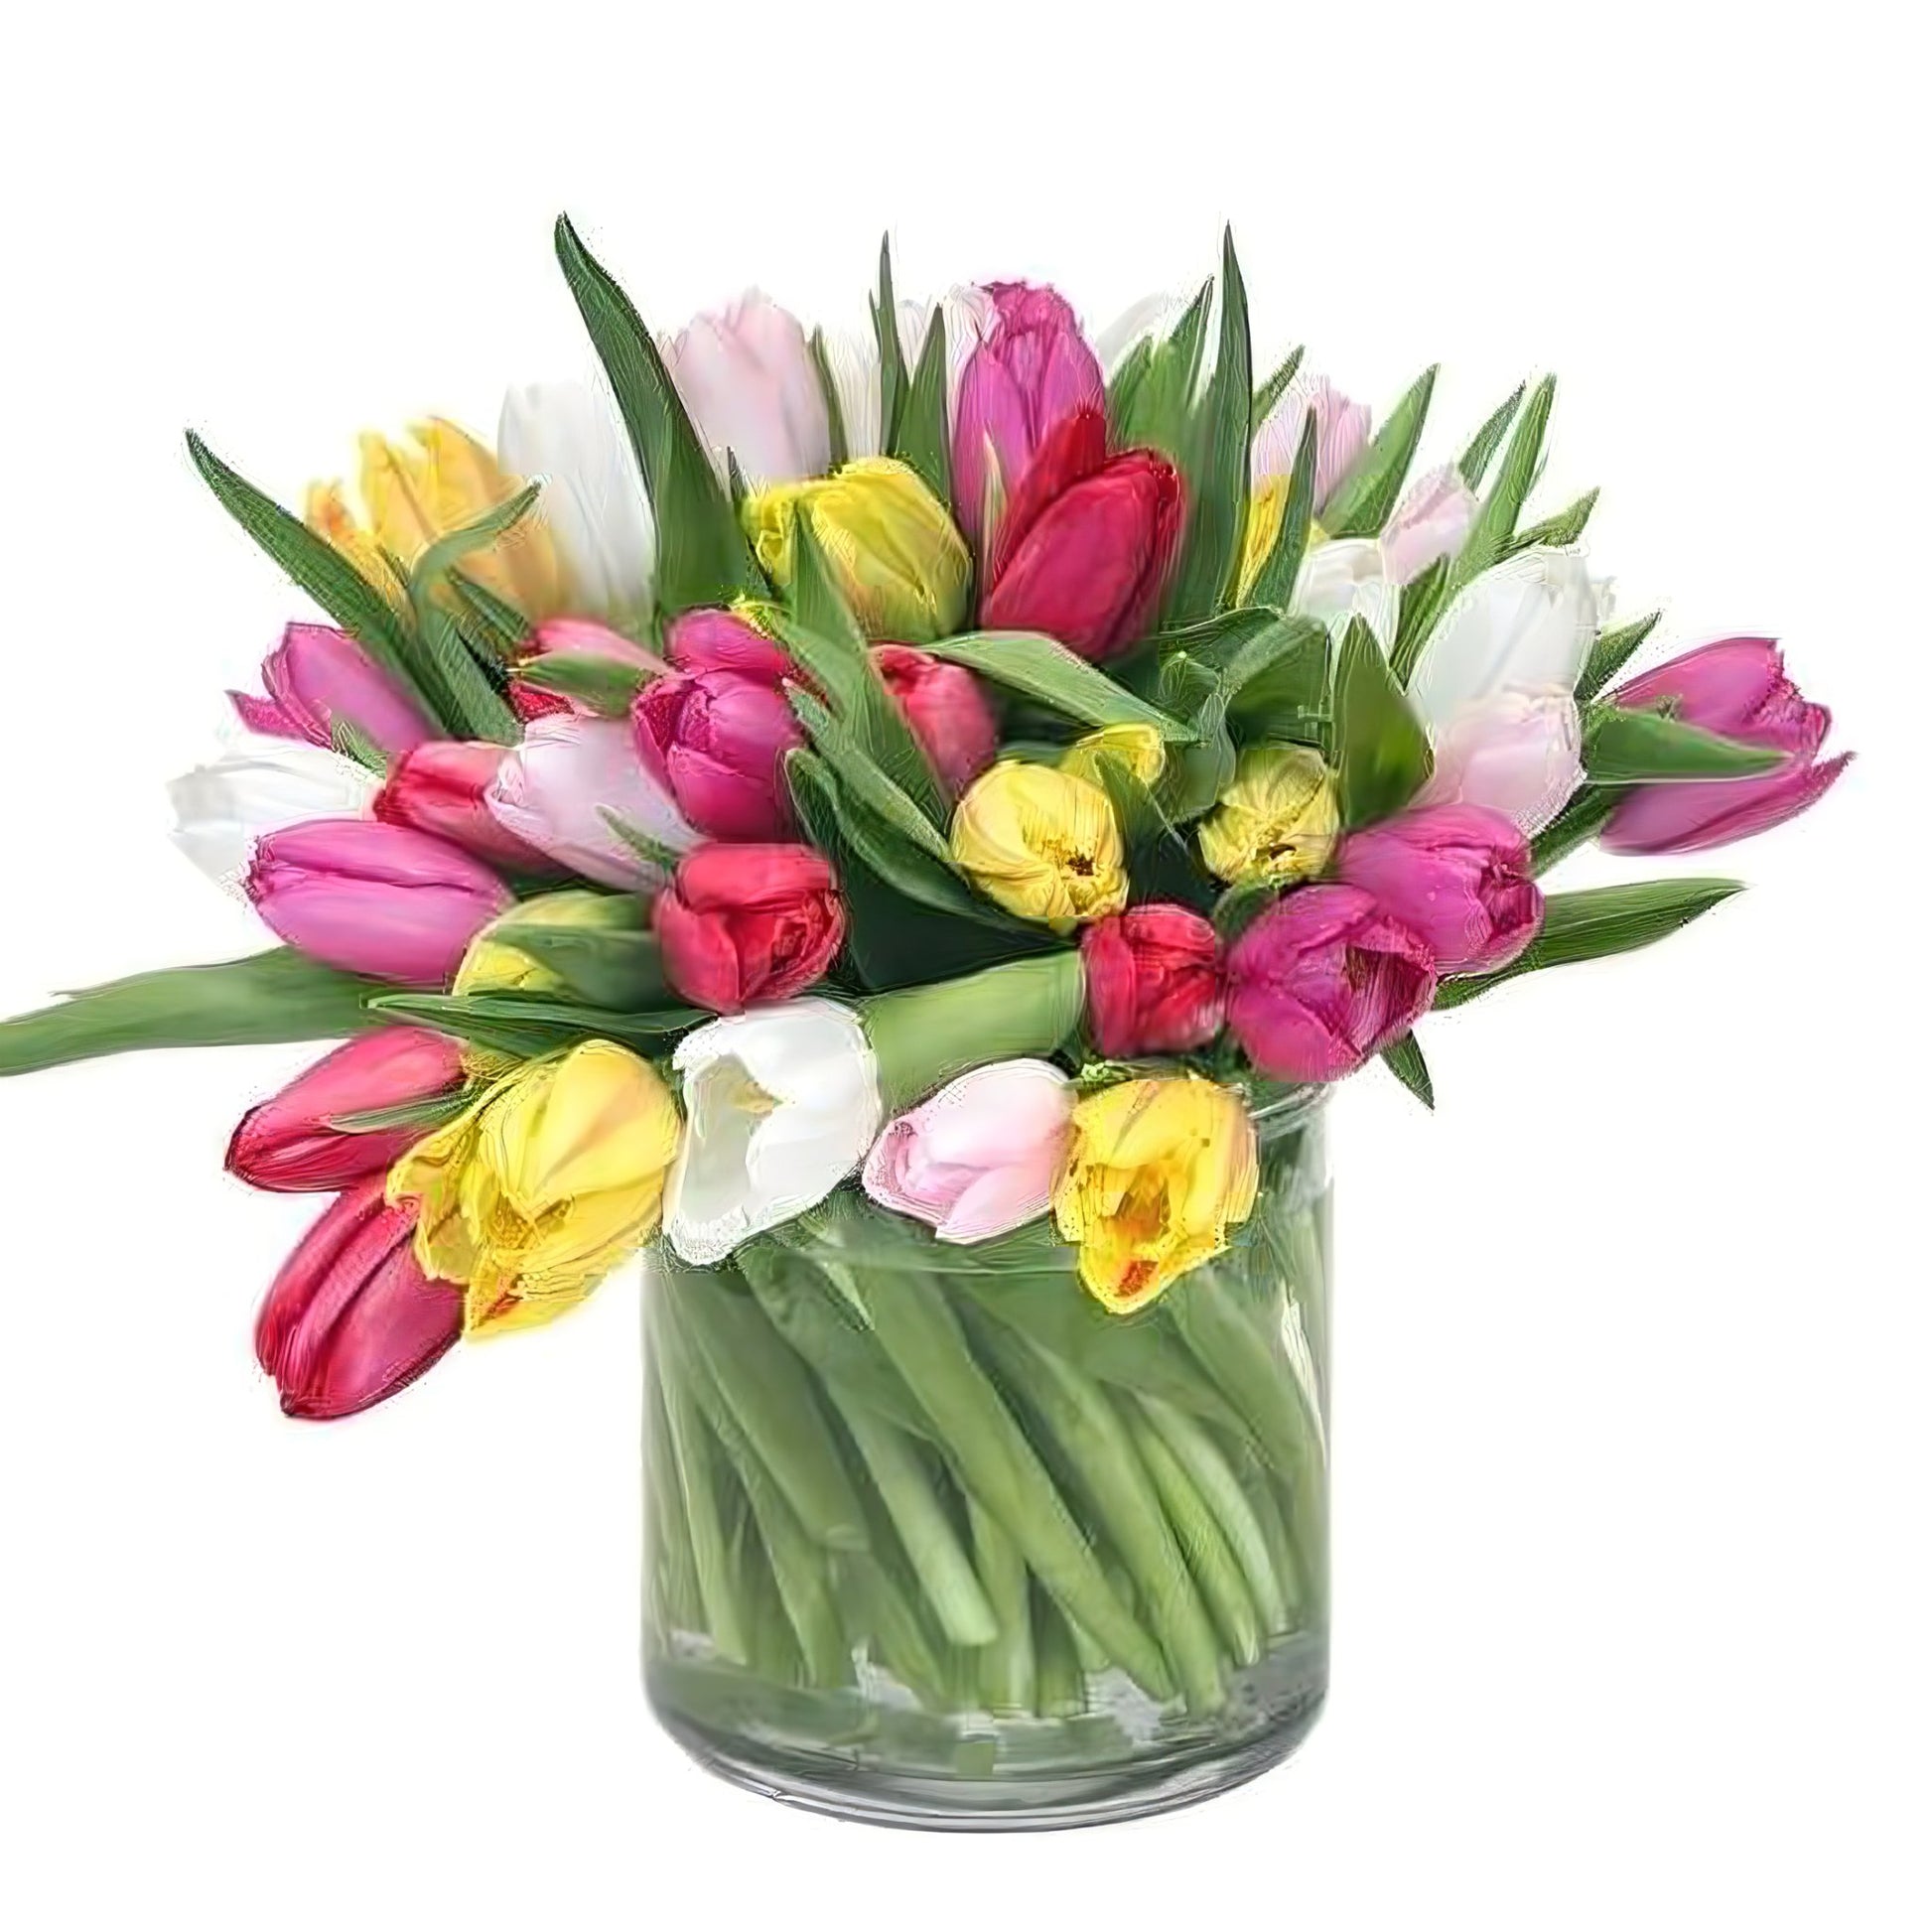 Wonderful Tulips - Fresh Cut Flowers - Queens Flower Delivery